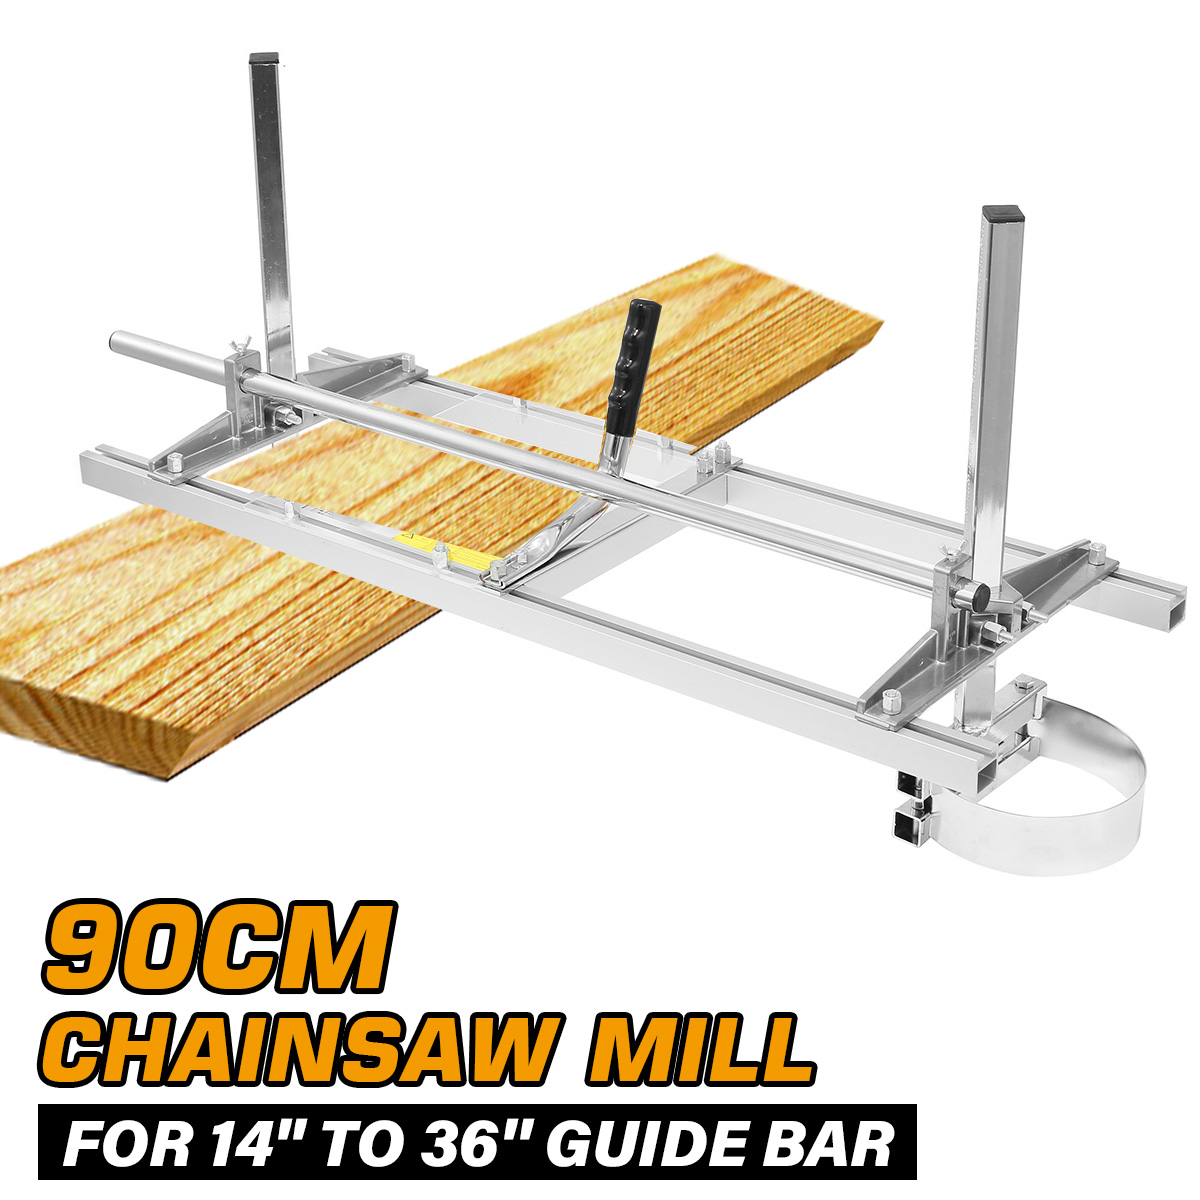 90cm-Portable-Chain-Saw-Mill-Planking-Milling-From-14-Inch-to-36-Inch-Guide-Bar-1346254-2